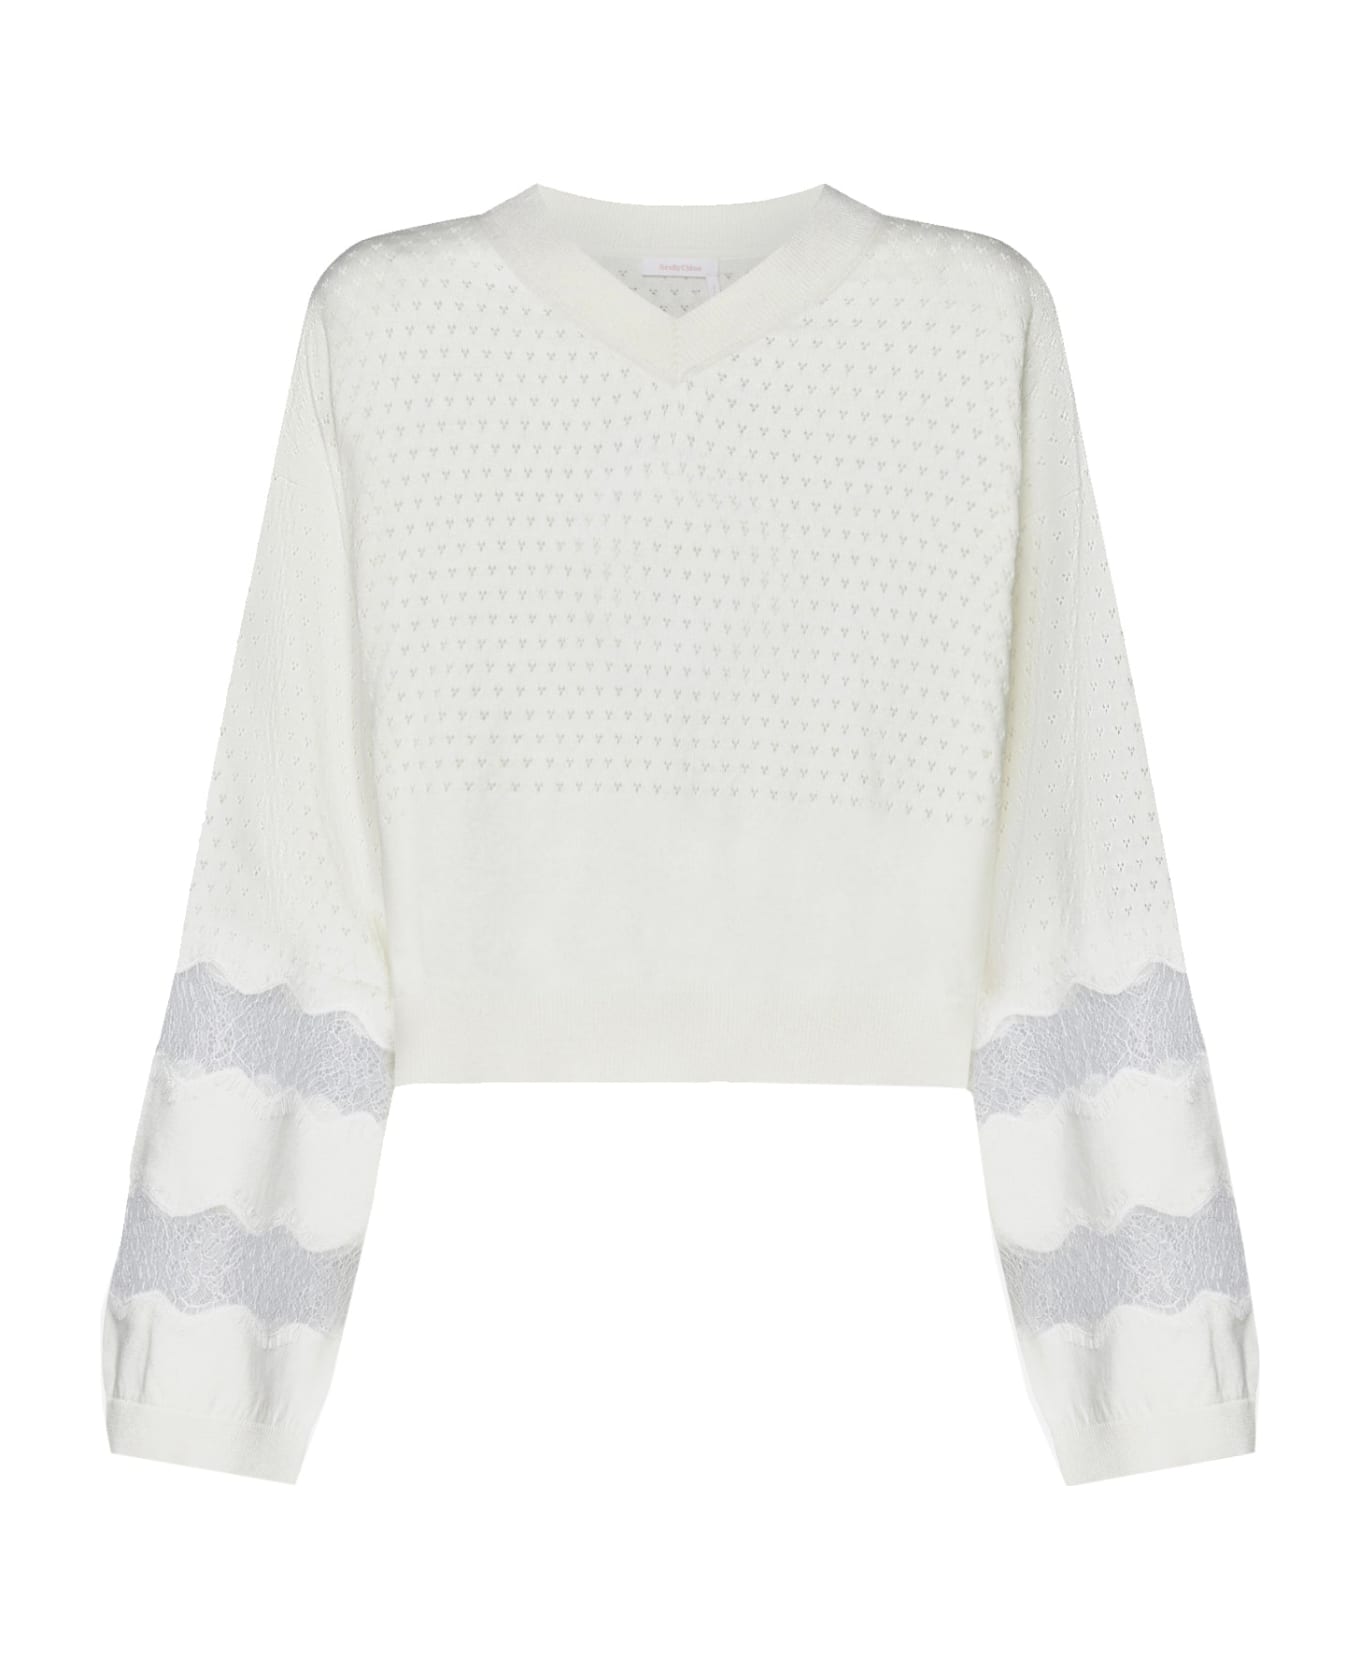 See by Chloé Cotton And Cashmere Pullover - White ニットウェア